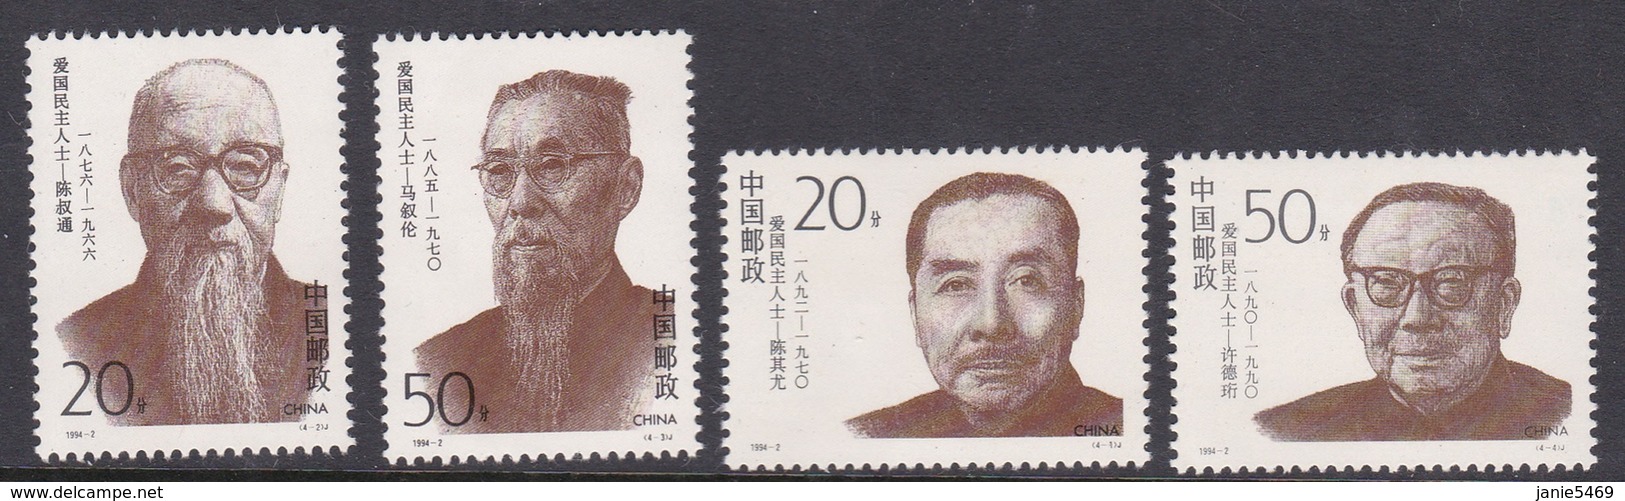 China People's Republic SG 3888-3891 1994 Revolutionaries 2nd Series, Mint Never Hinged - Neufs